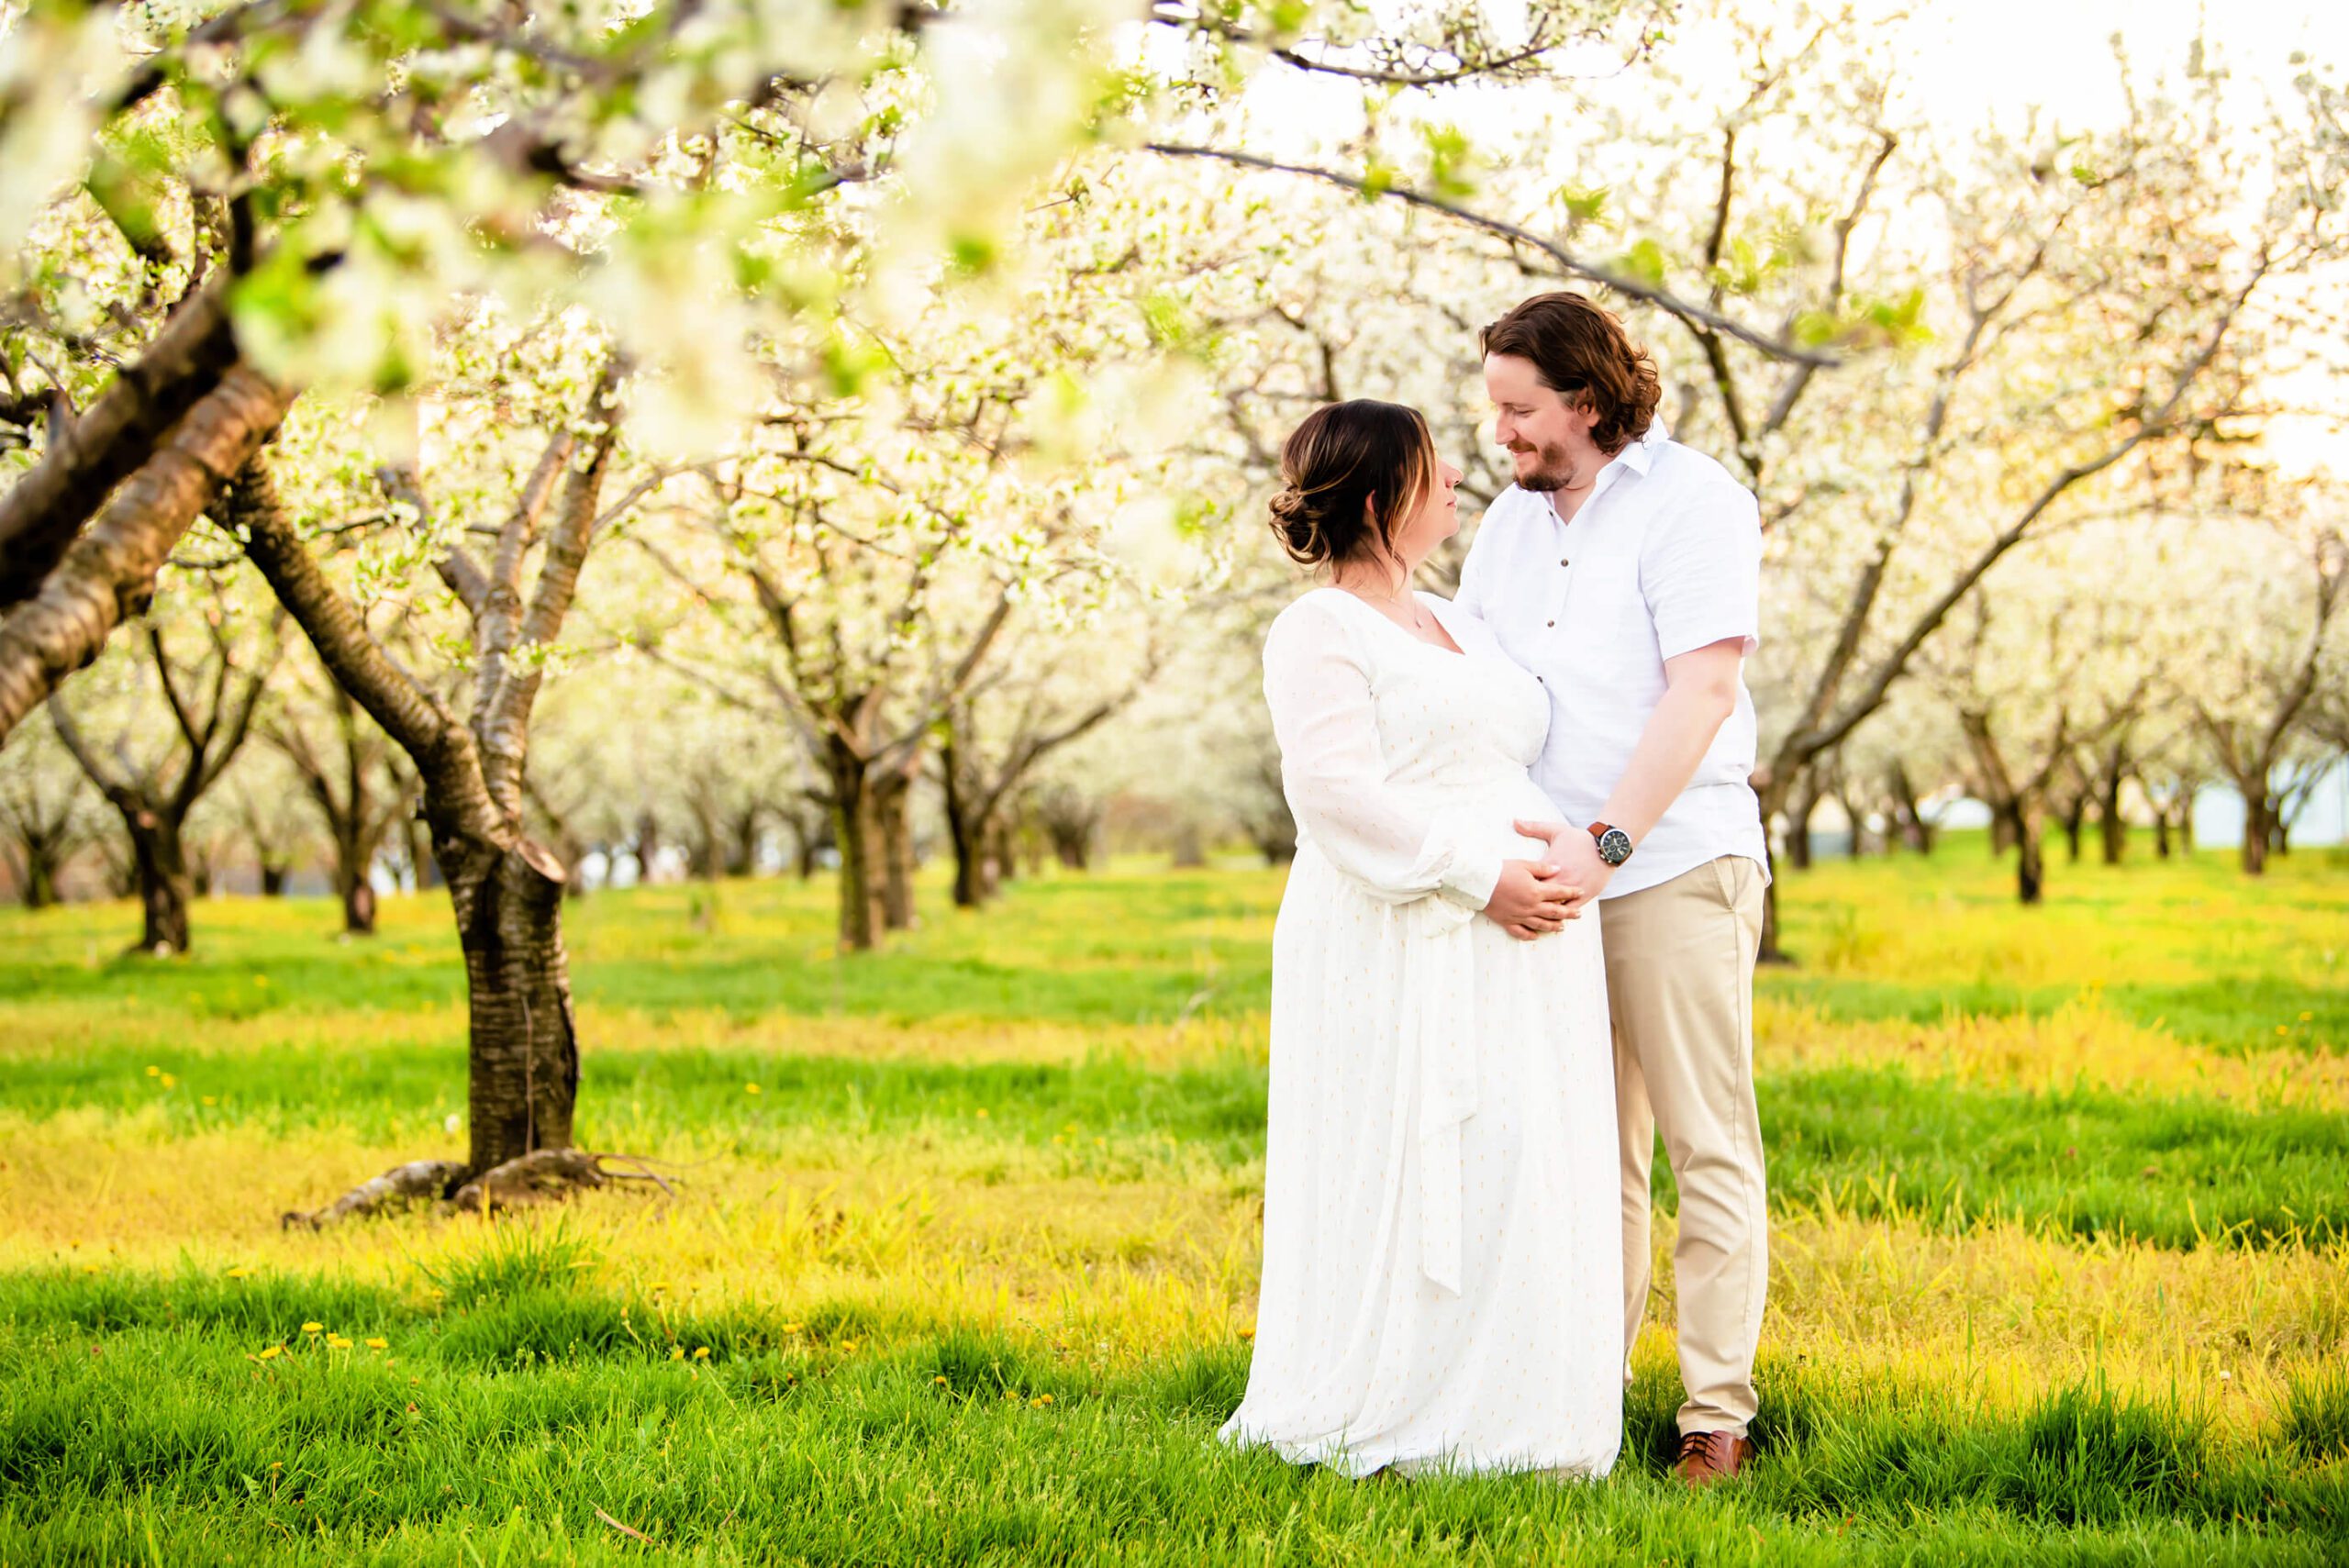 Outdoor Burlington & Toronto Maternity Photography session at the White Cherry Blossoms